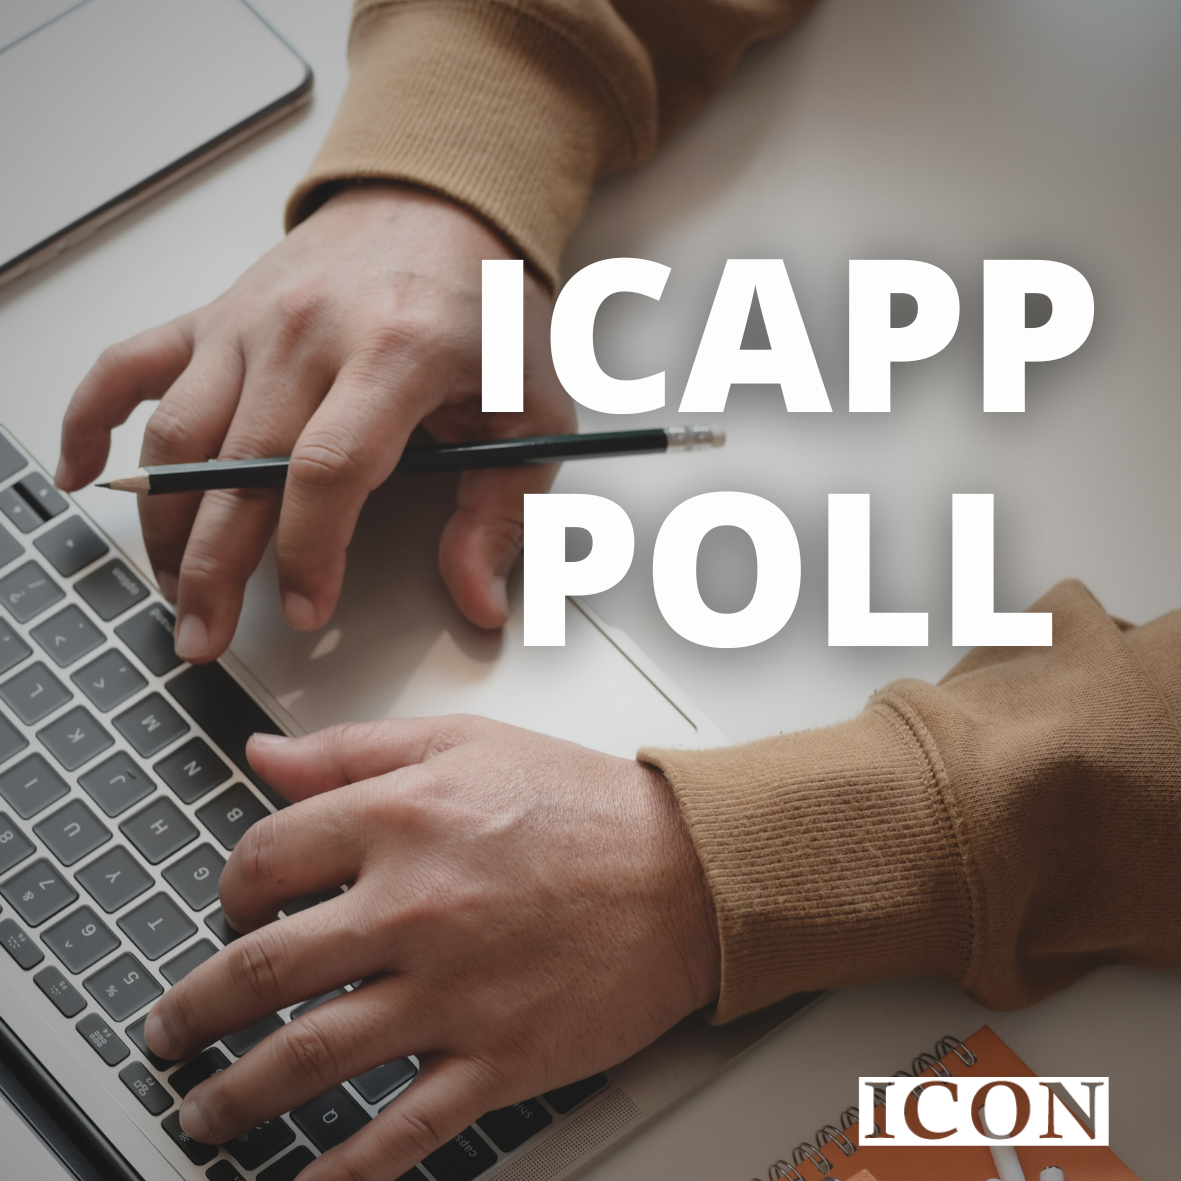 ICAPP poll released on Ohio voter views on Issue 1 and subsequent